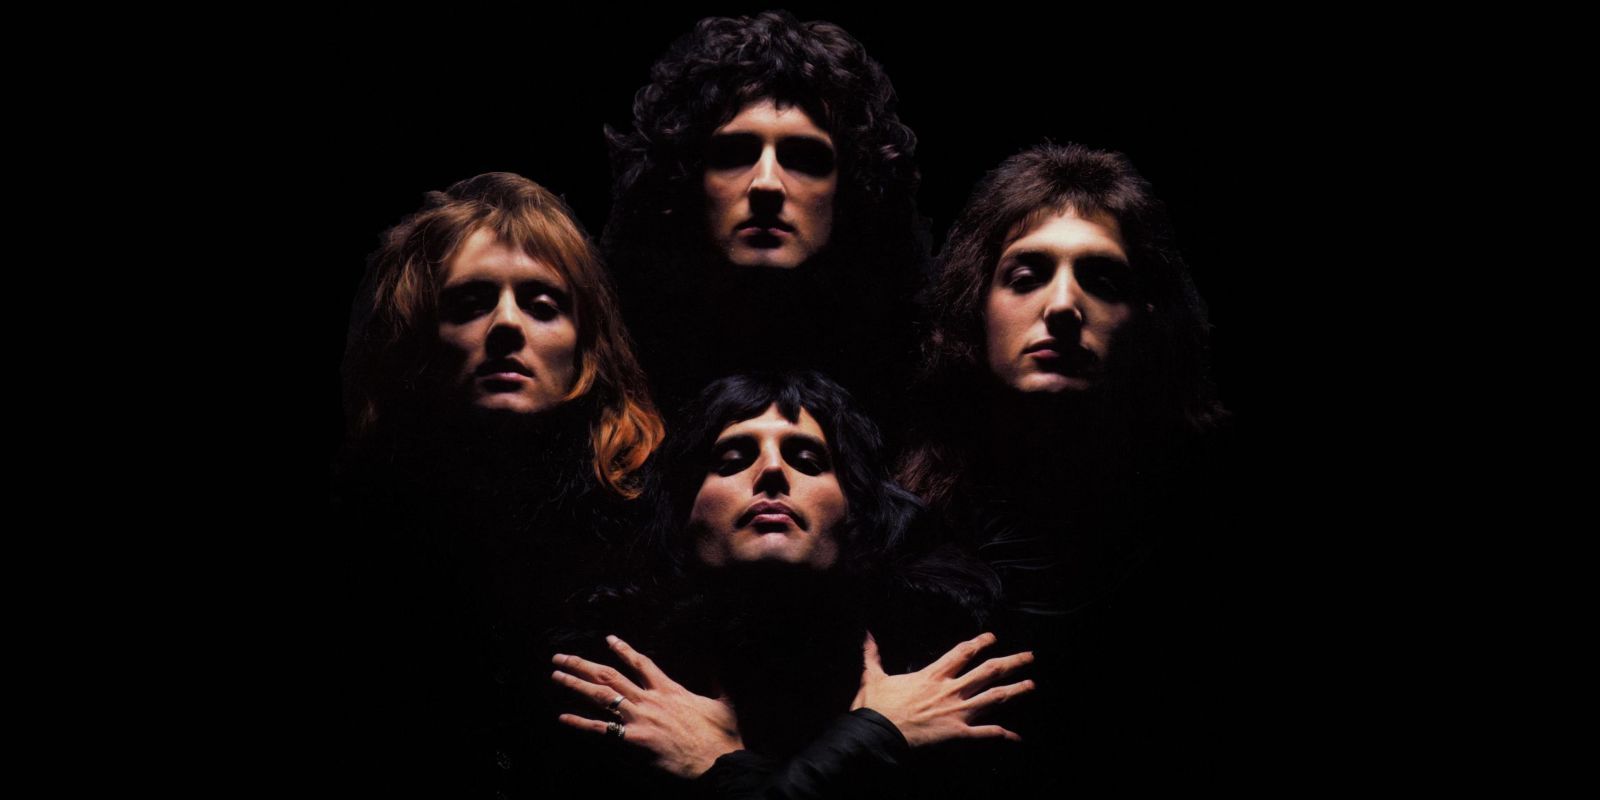 New Director Found for Queen Biopic Bohemian Rhapsody